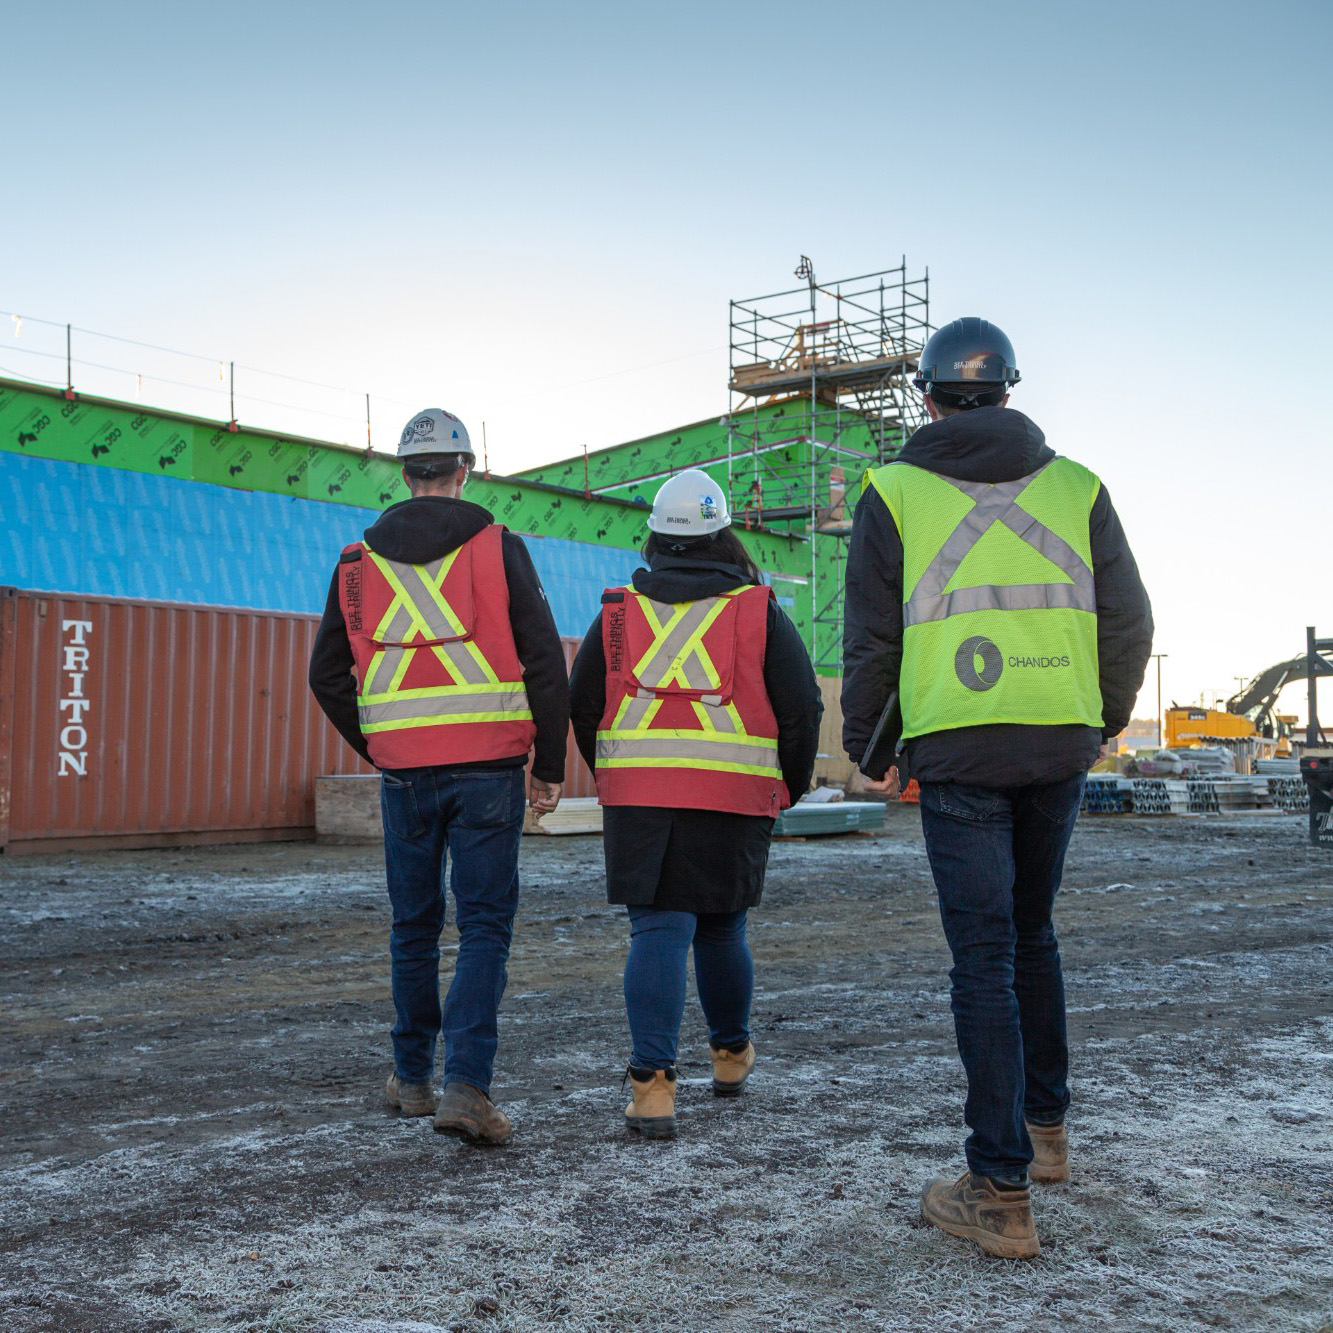 Three Chandos construction workers walking together towards a construction site.